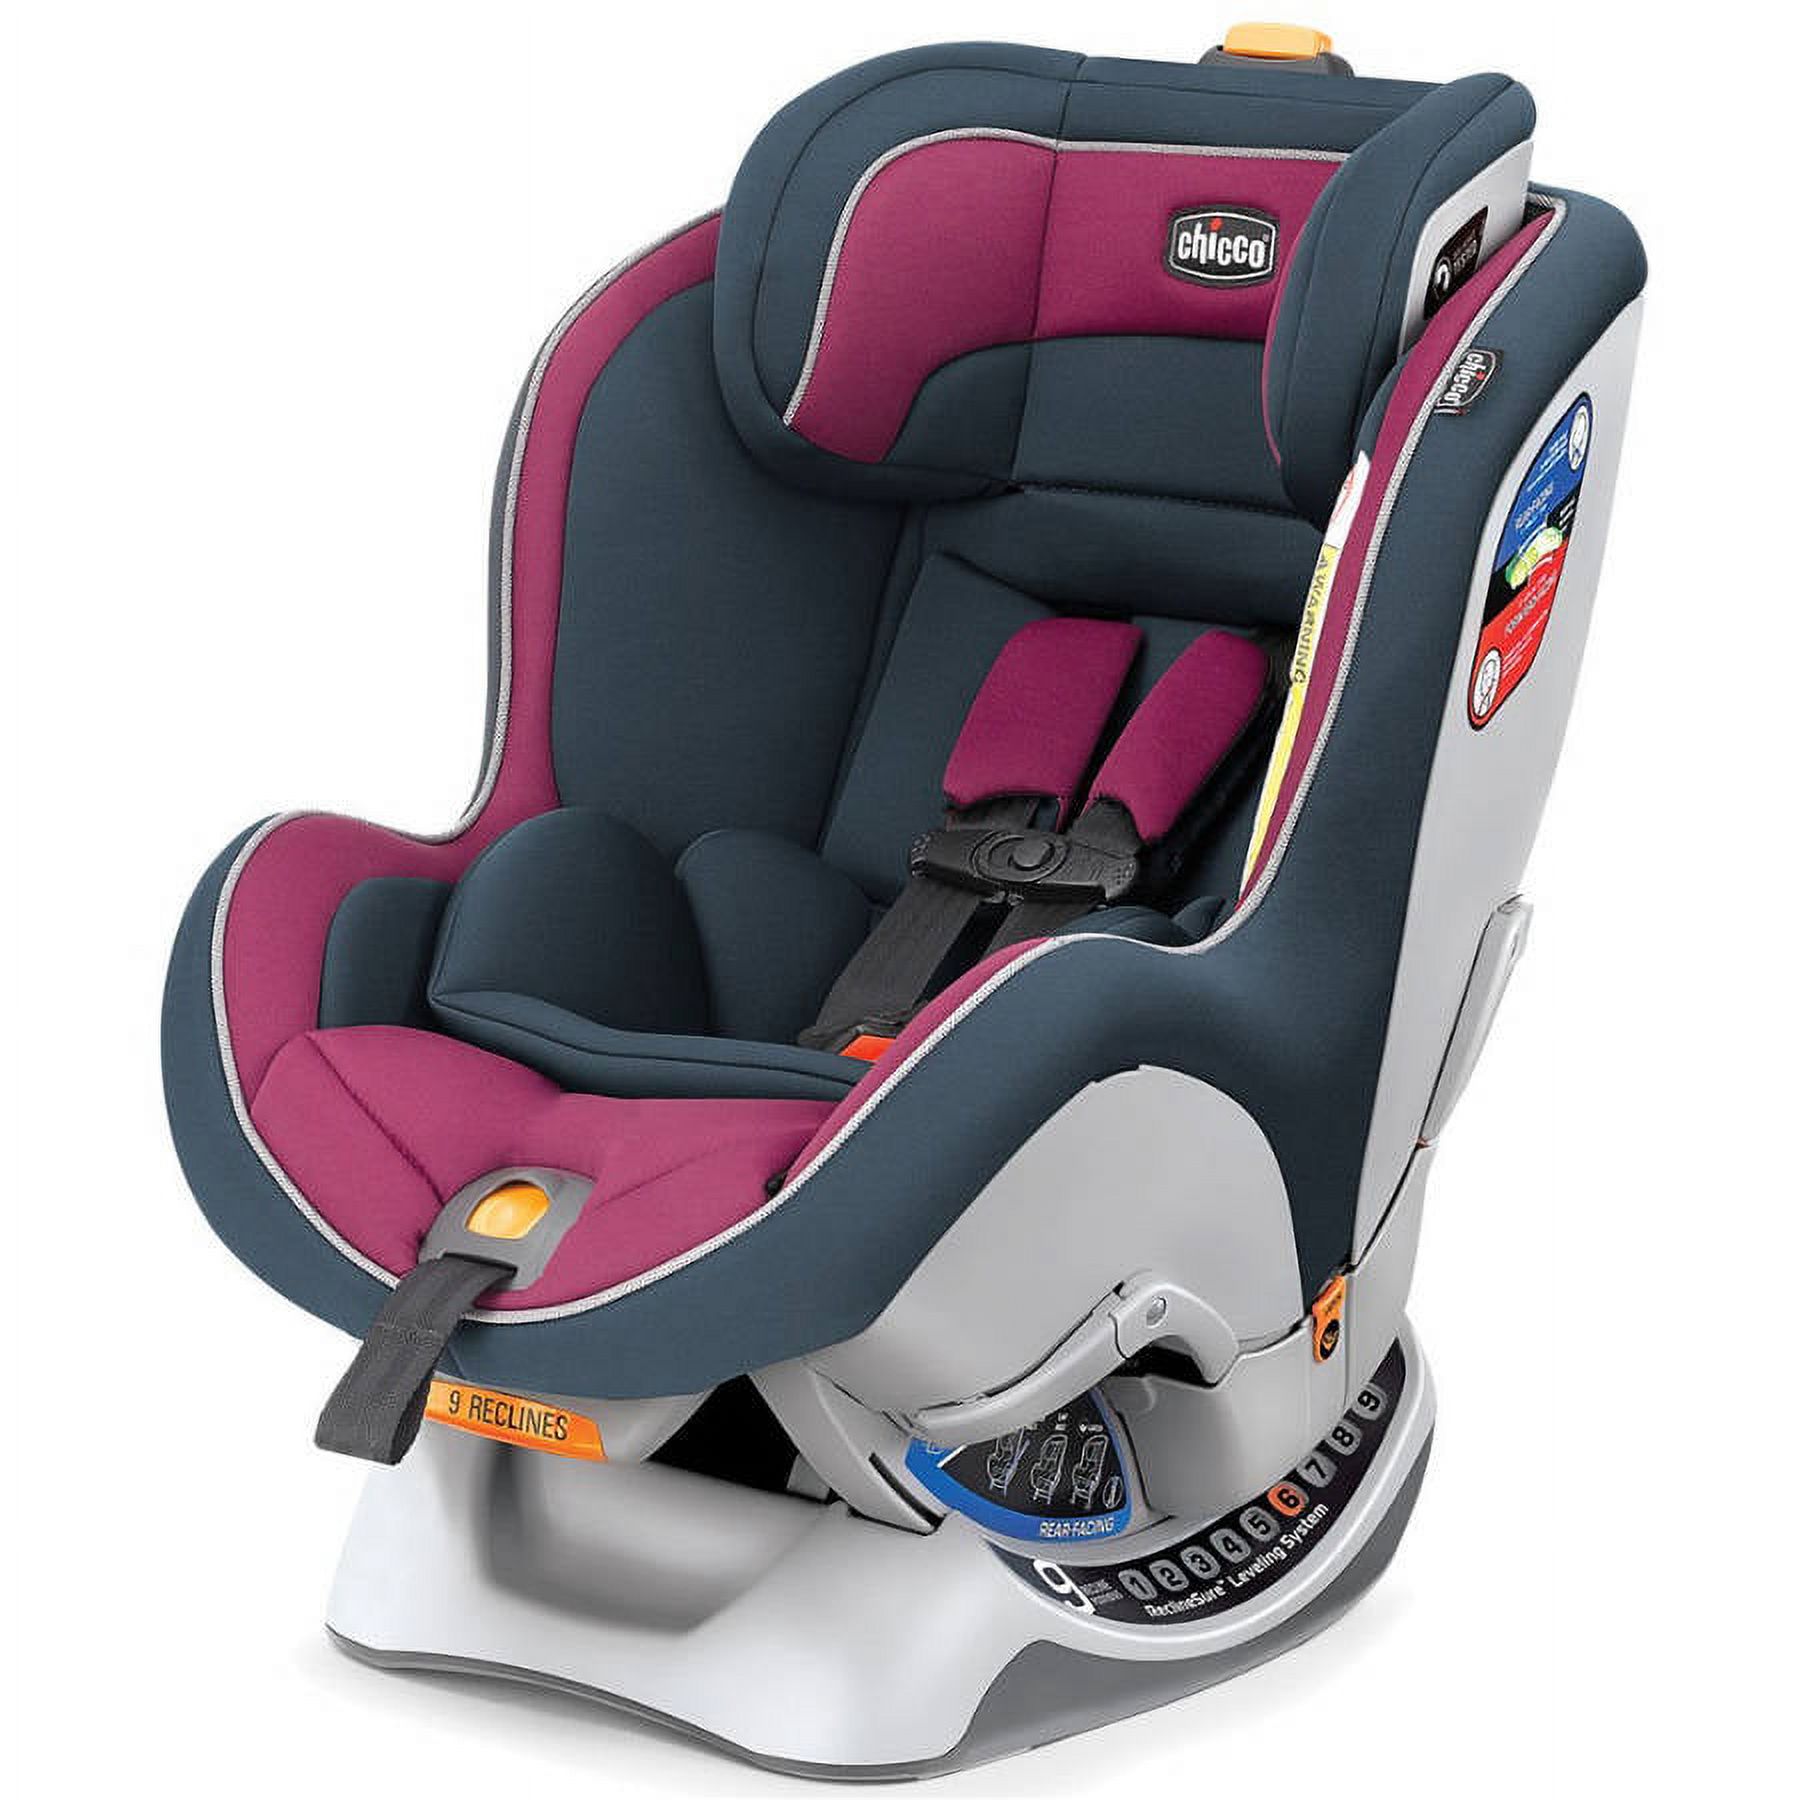 Chicco Nextfit Convertible Car Seat, Choose your color - image 1 of 10